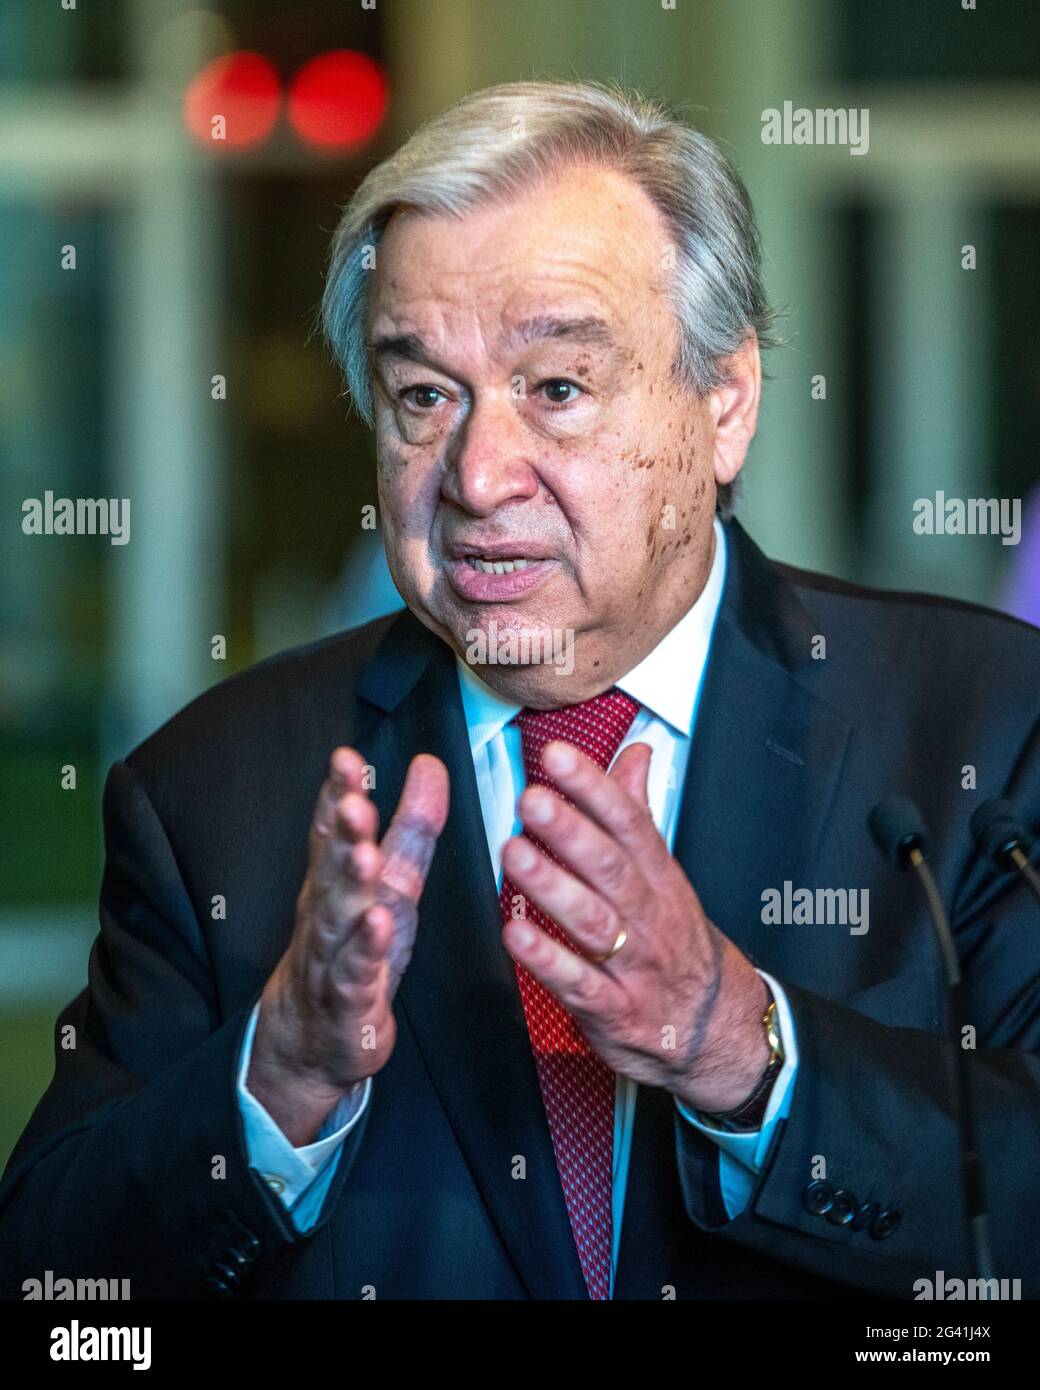 New York, USA. 18th June, 2021. United Nations Secretary-General António Guterres speaks after being reelected for a second 5-year term starting January 1st. Guterres said that democracy must be reinstated in Myanmar, political detainees must be freed and human rights abuses and killings must stop. Credit: Enrique Shore/Alamy Live News Stock Photo